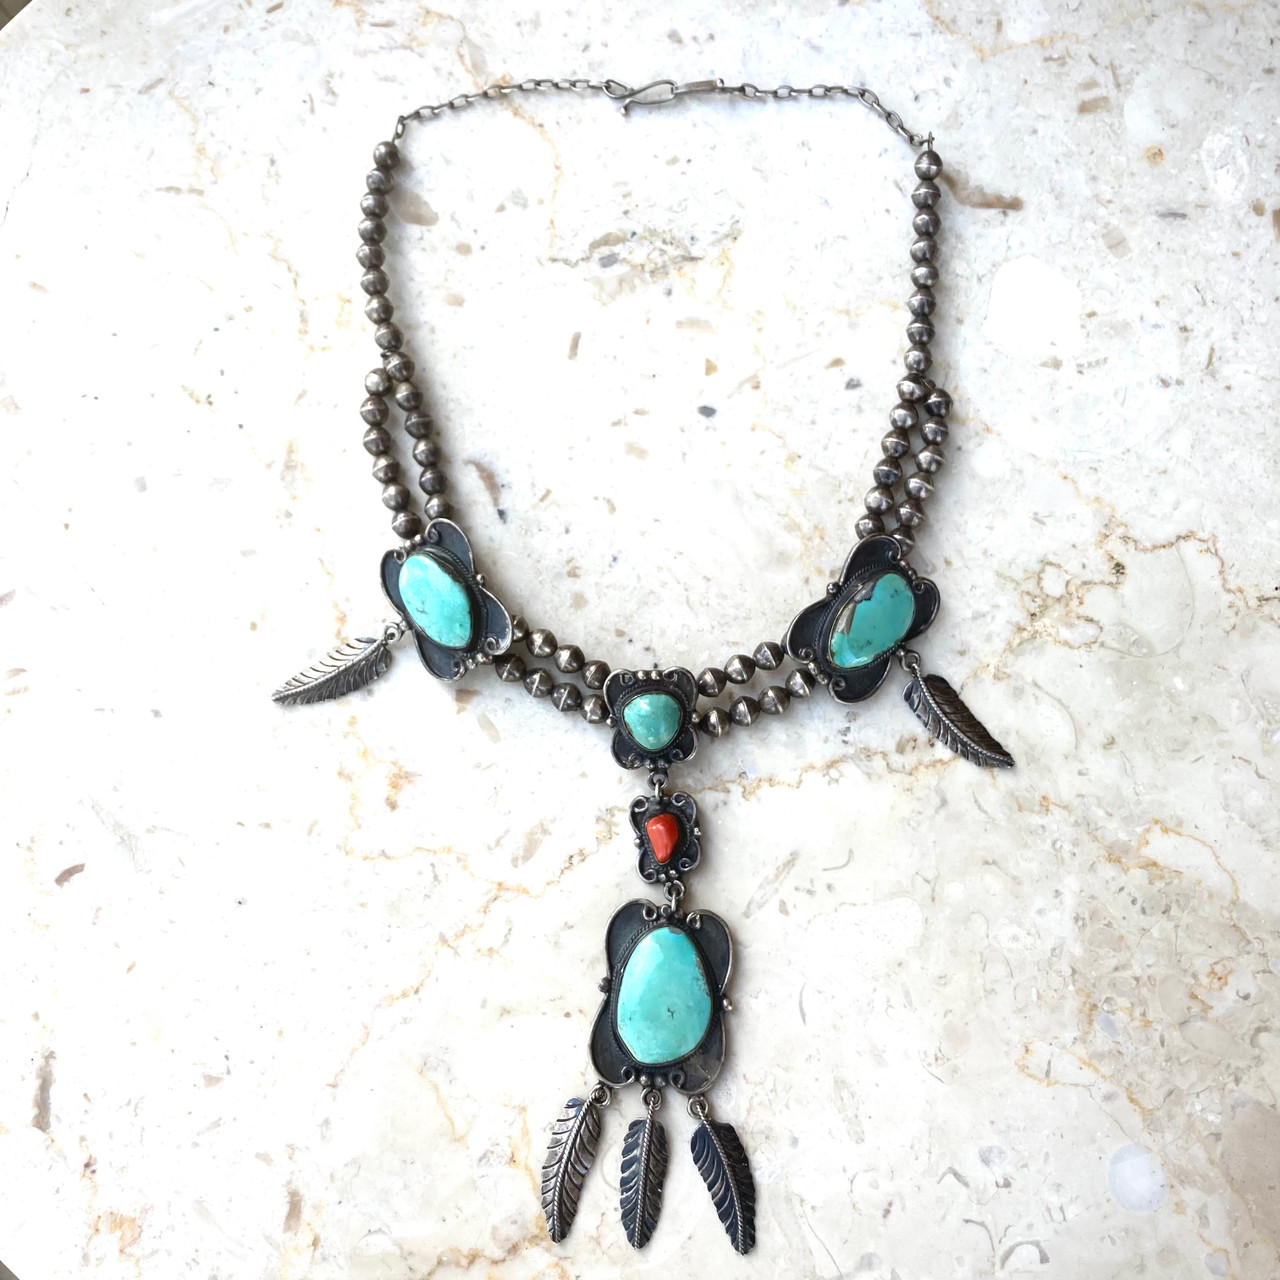 Bisbee Turquoise Pendant Necklace by Steven J Begay - Turquoise